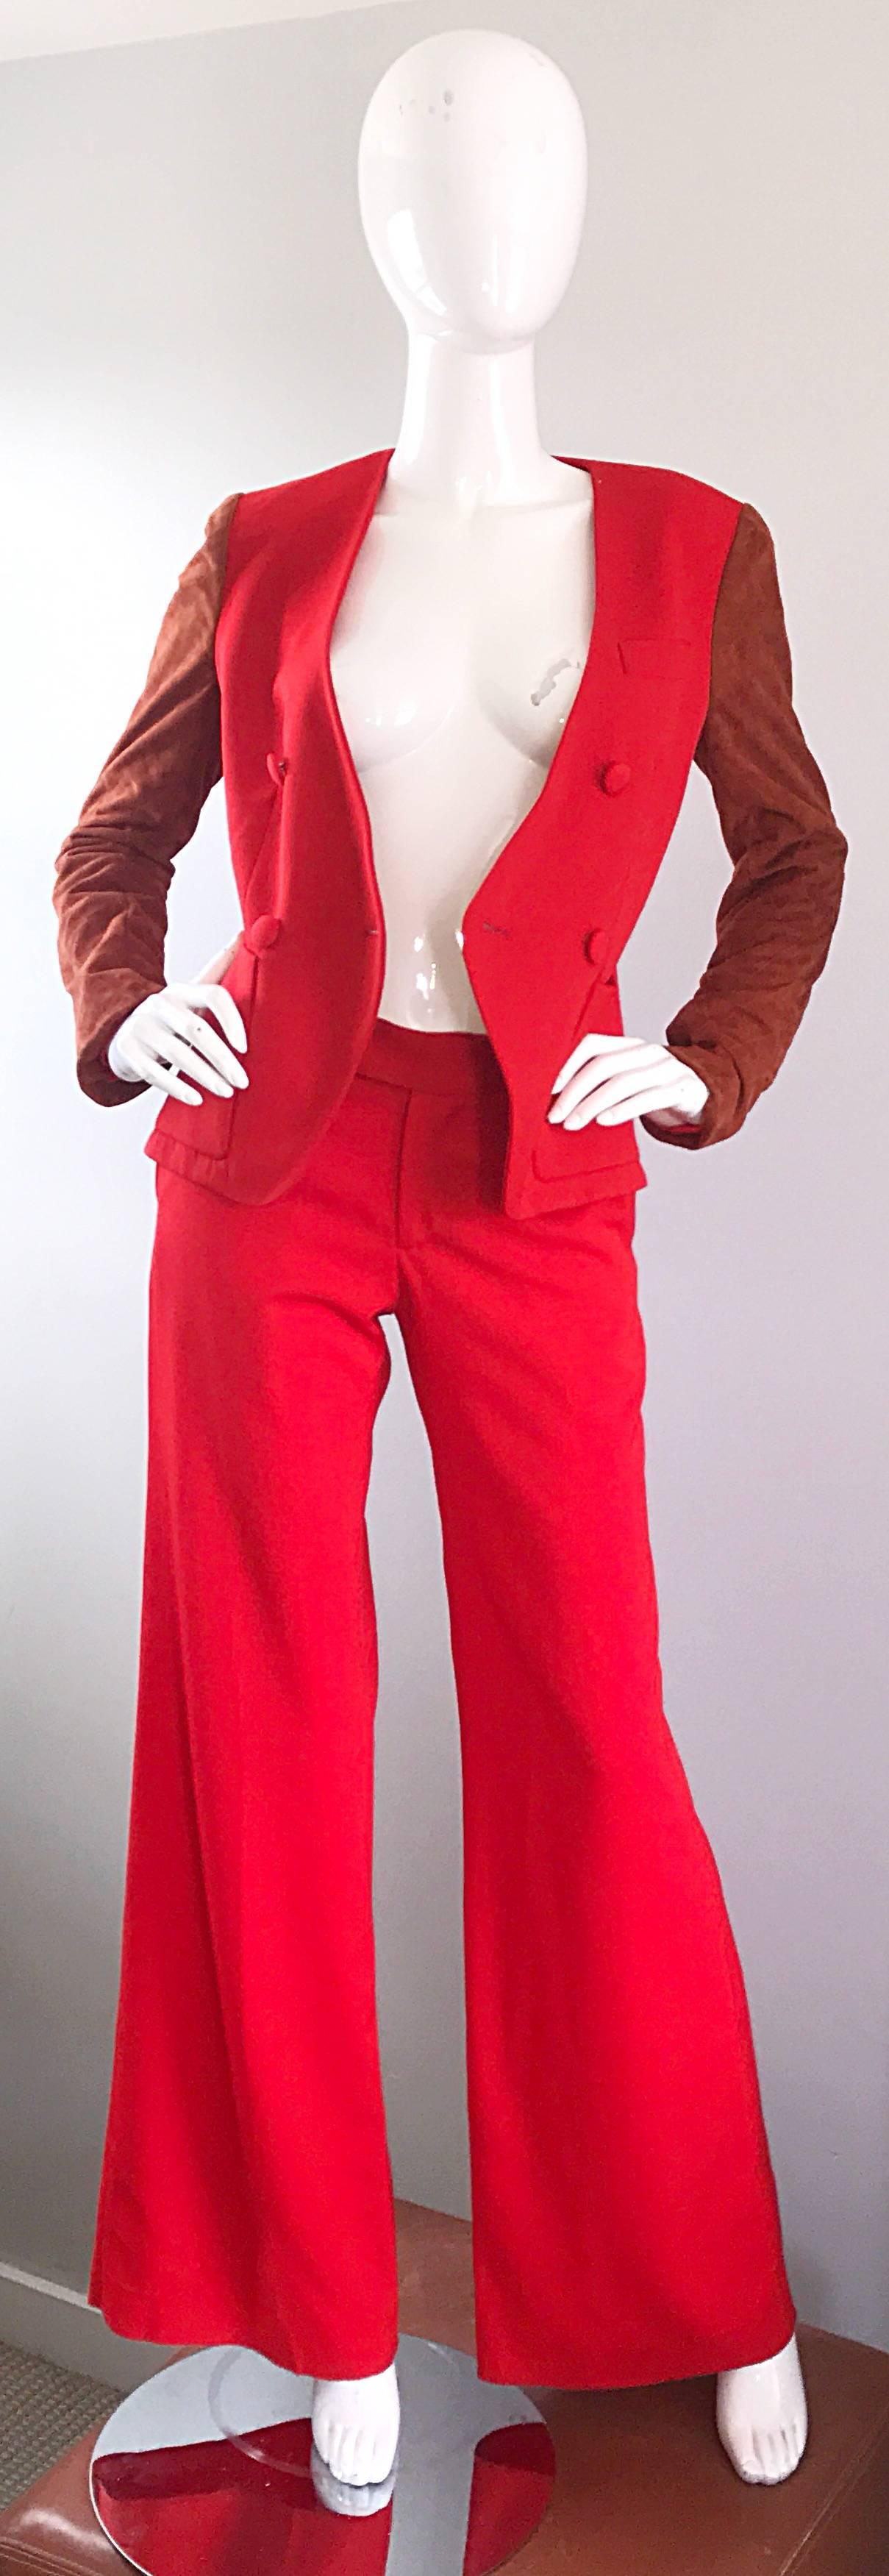 Stylish vintage 90s DOUGLAS HANNANT red wool and Burt orange quilted suede wide leg pant suit! Features a red double breasted fitted jacket, with flared leg trousers. Sleek tailored fit on the blazer and pants. Burnt orange quilted suede leather